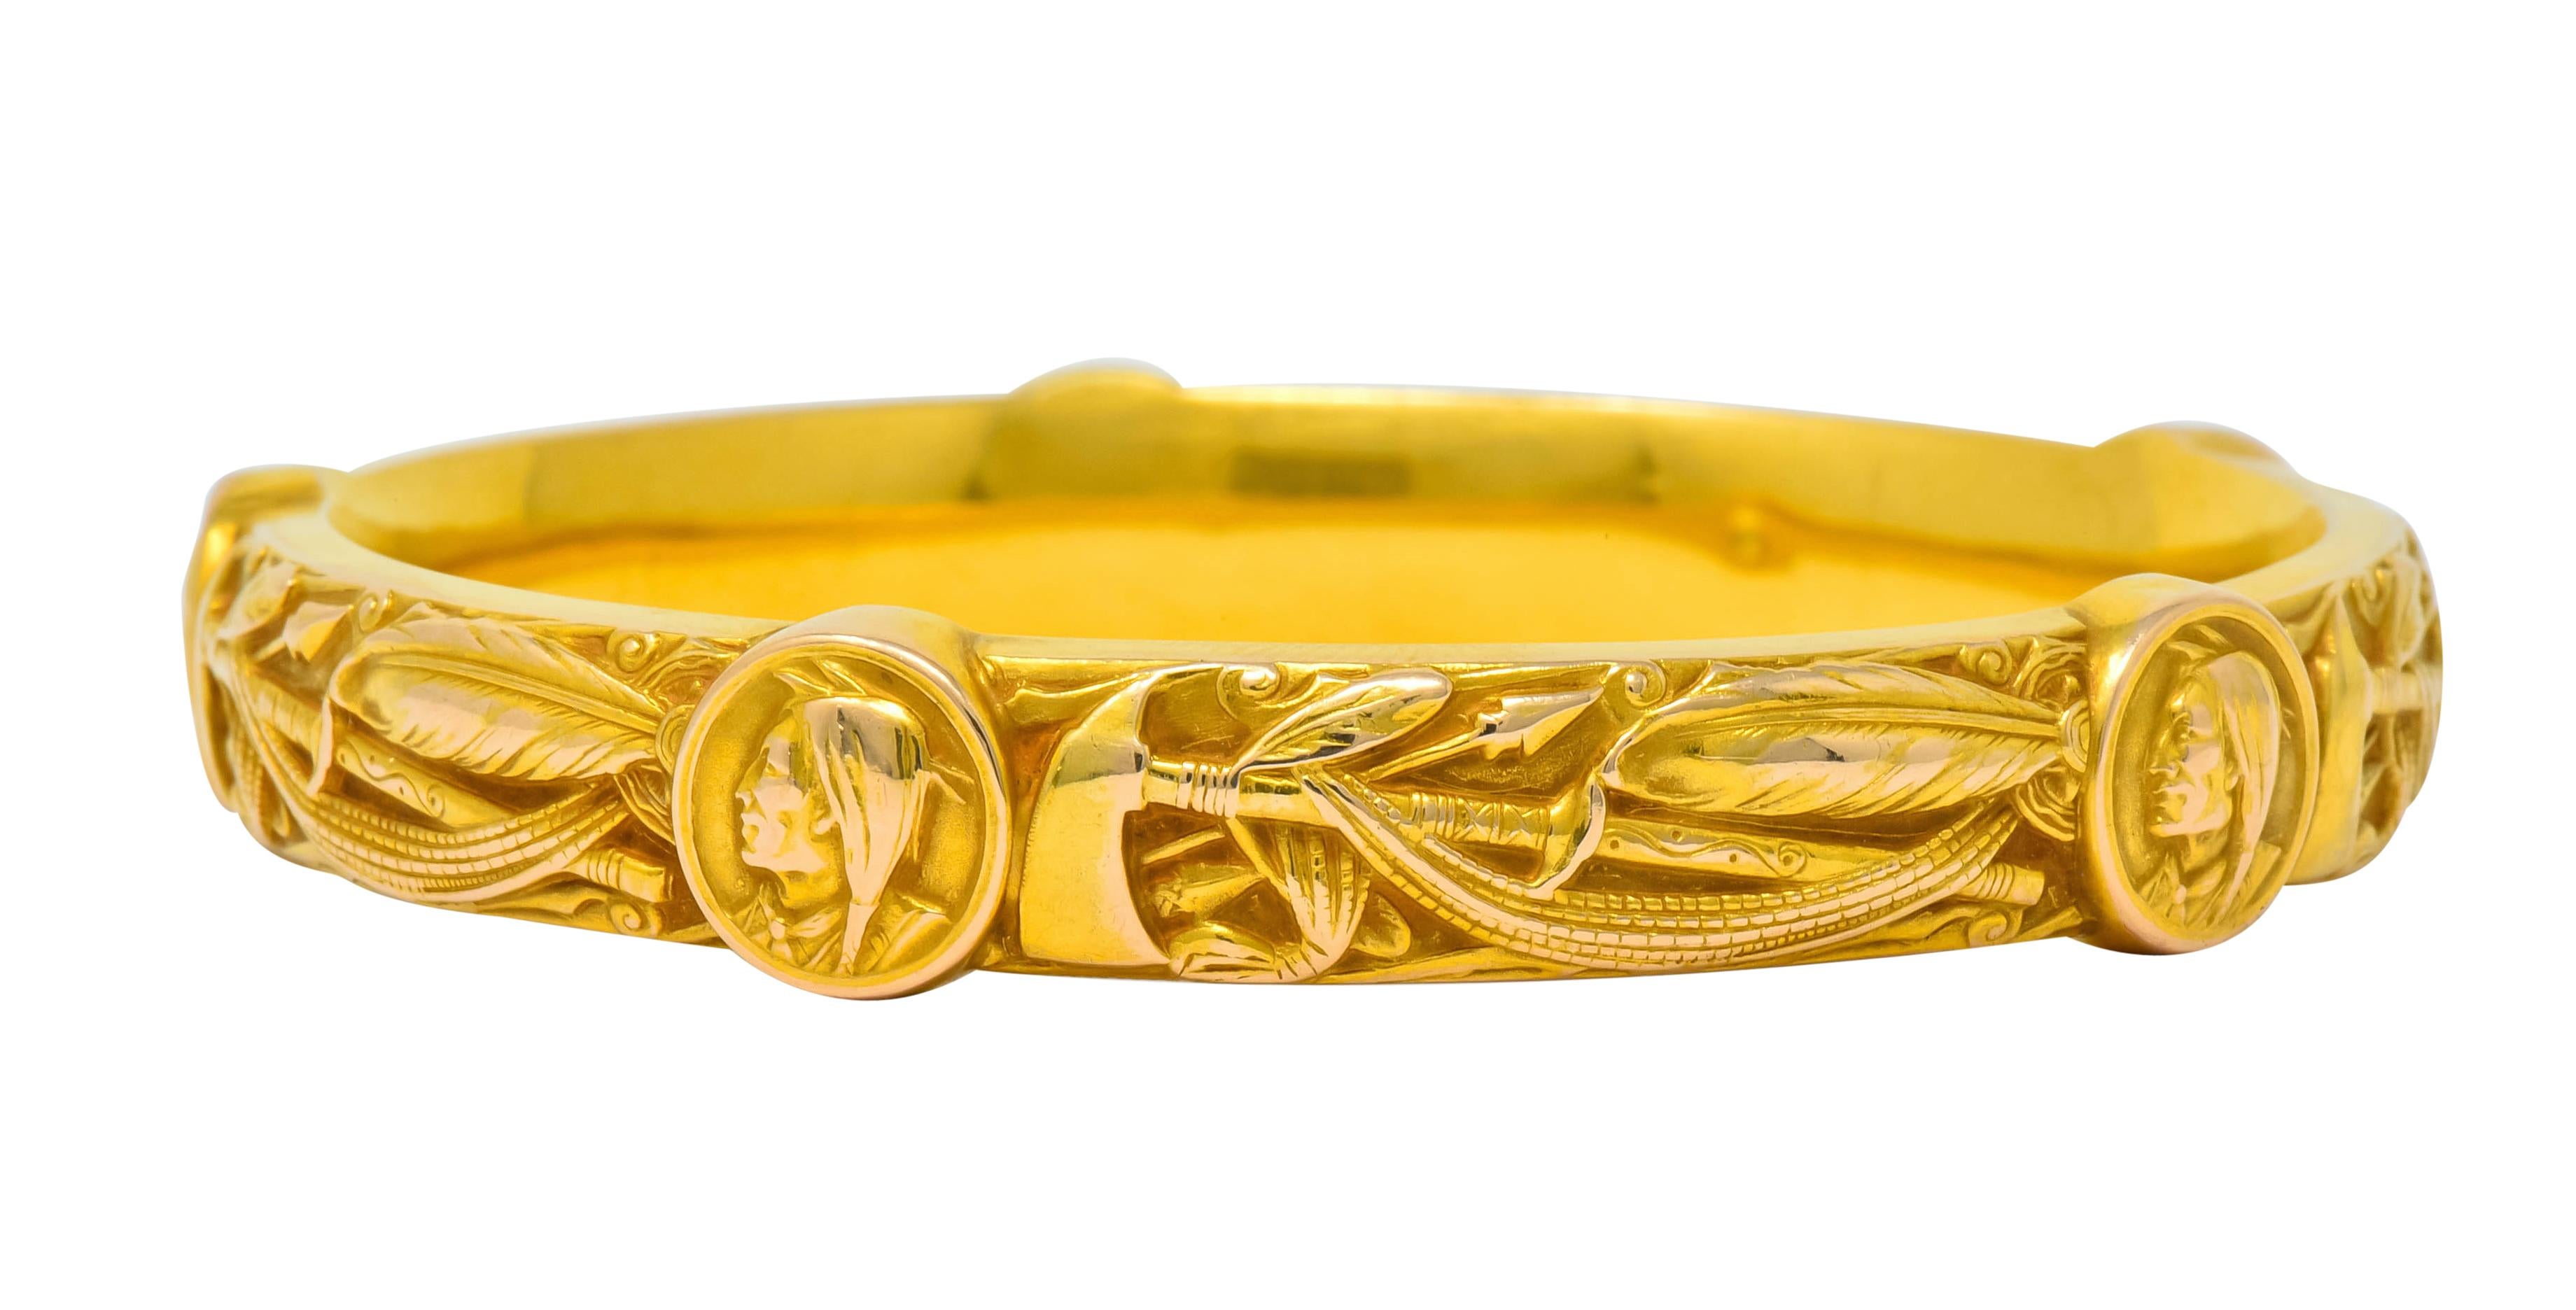 Bangle style bracelet comprised of highly rendered motifs of arrows, hatchets, feathers

With five round stations, each featuring a portrait of a Native American

With maker’s mark for Riker Brothers and stamped 14k for 14 karat gold

Circa